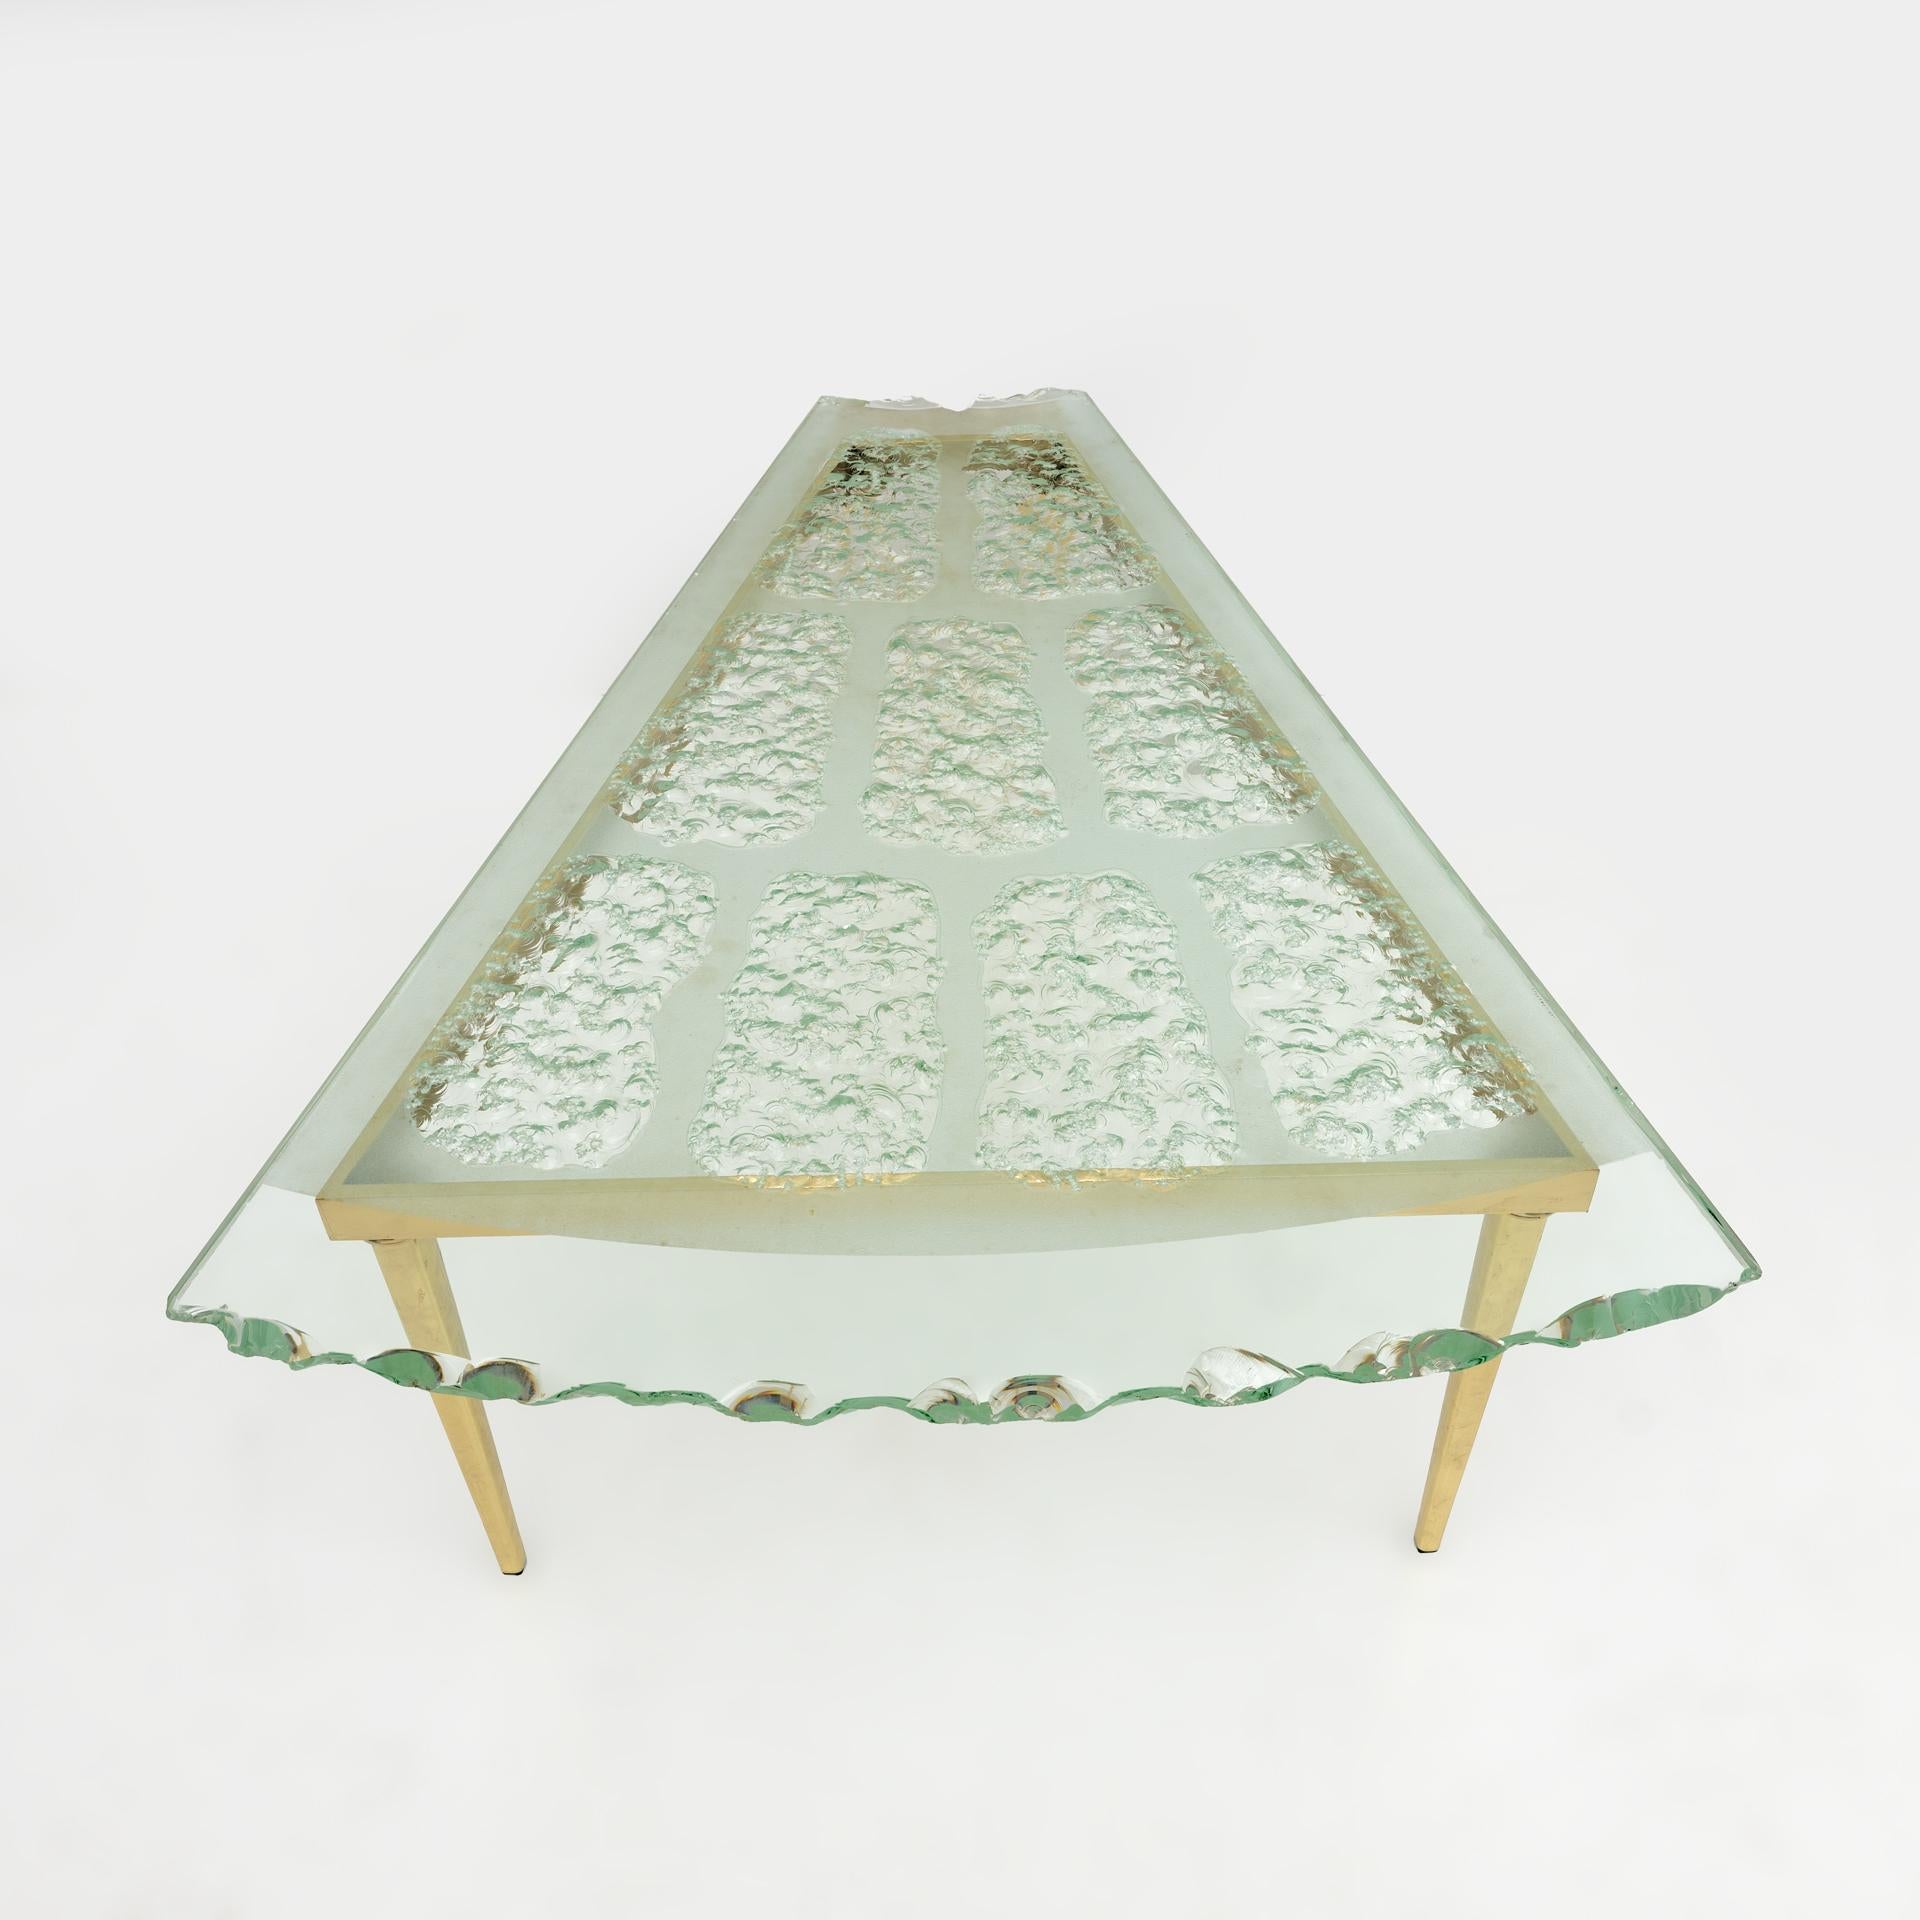 Italian Mid-Century Modern Chiseled Glass Coffee Table Attr. Max Ingrand by Fontana Arte For Sale